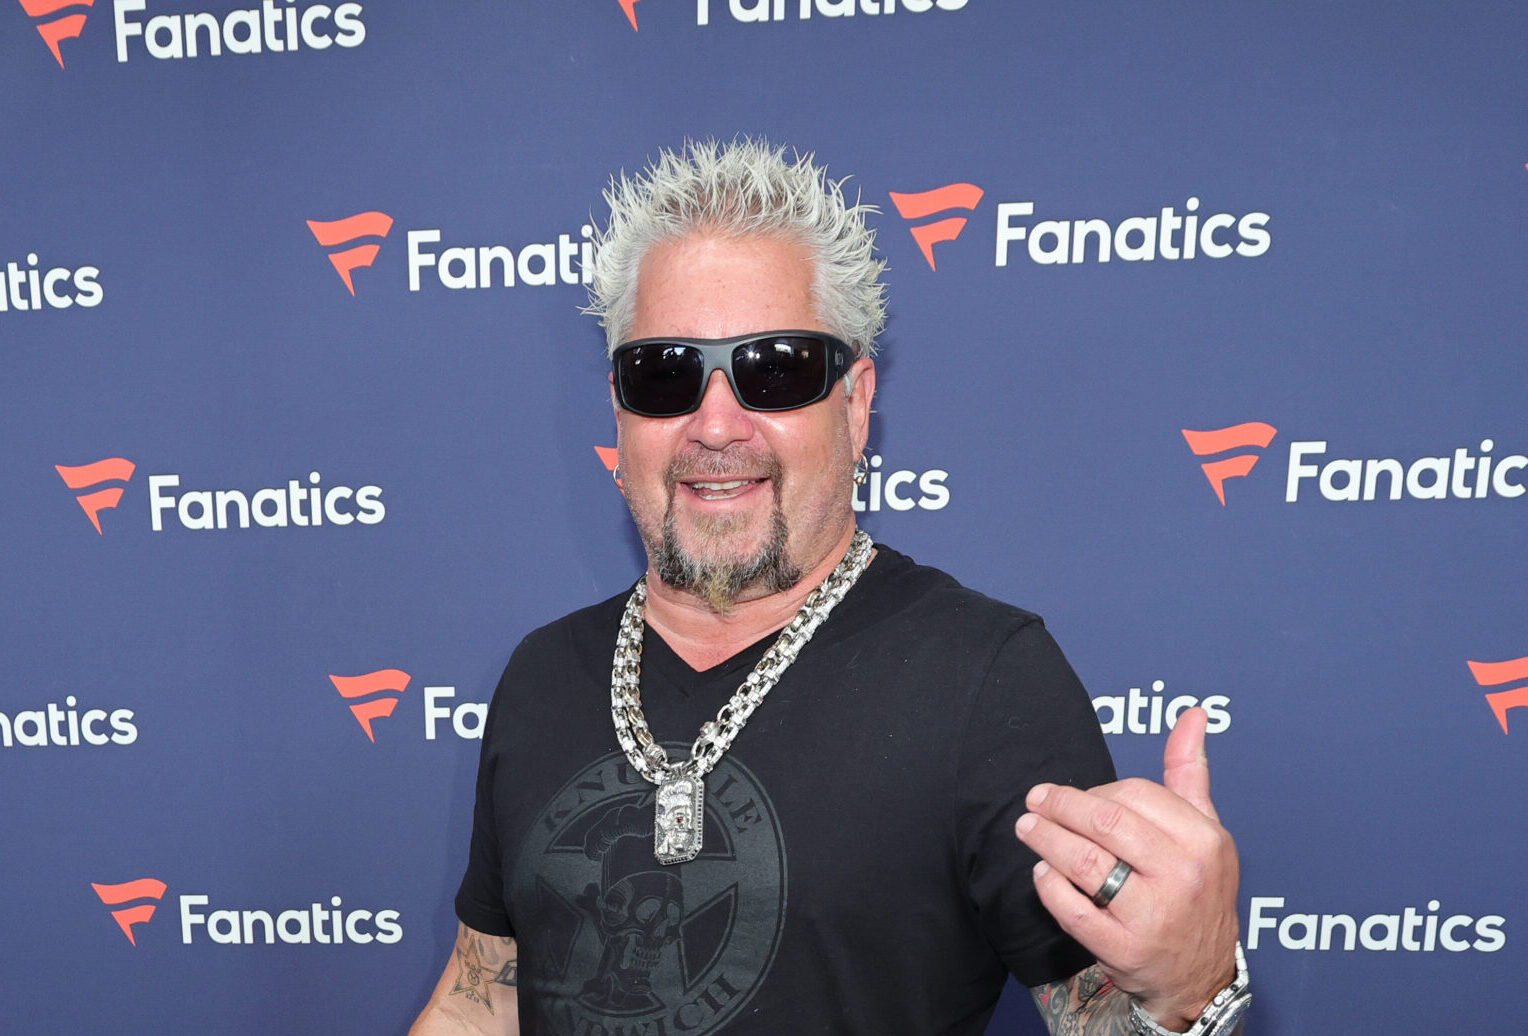 Guy Fieri is known for his flavor packed dishes.